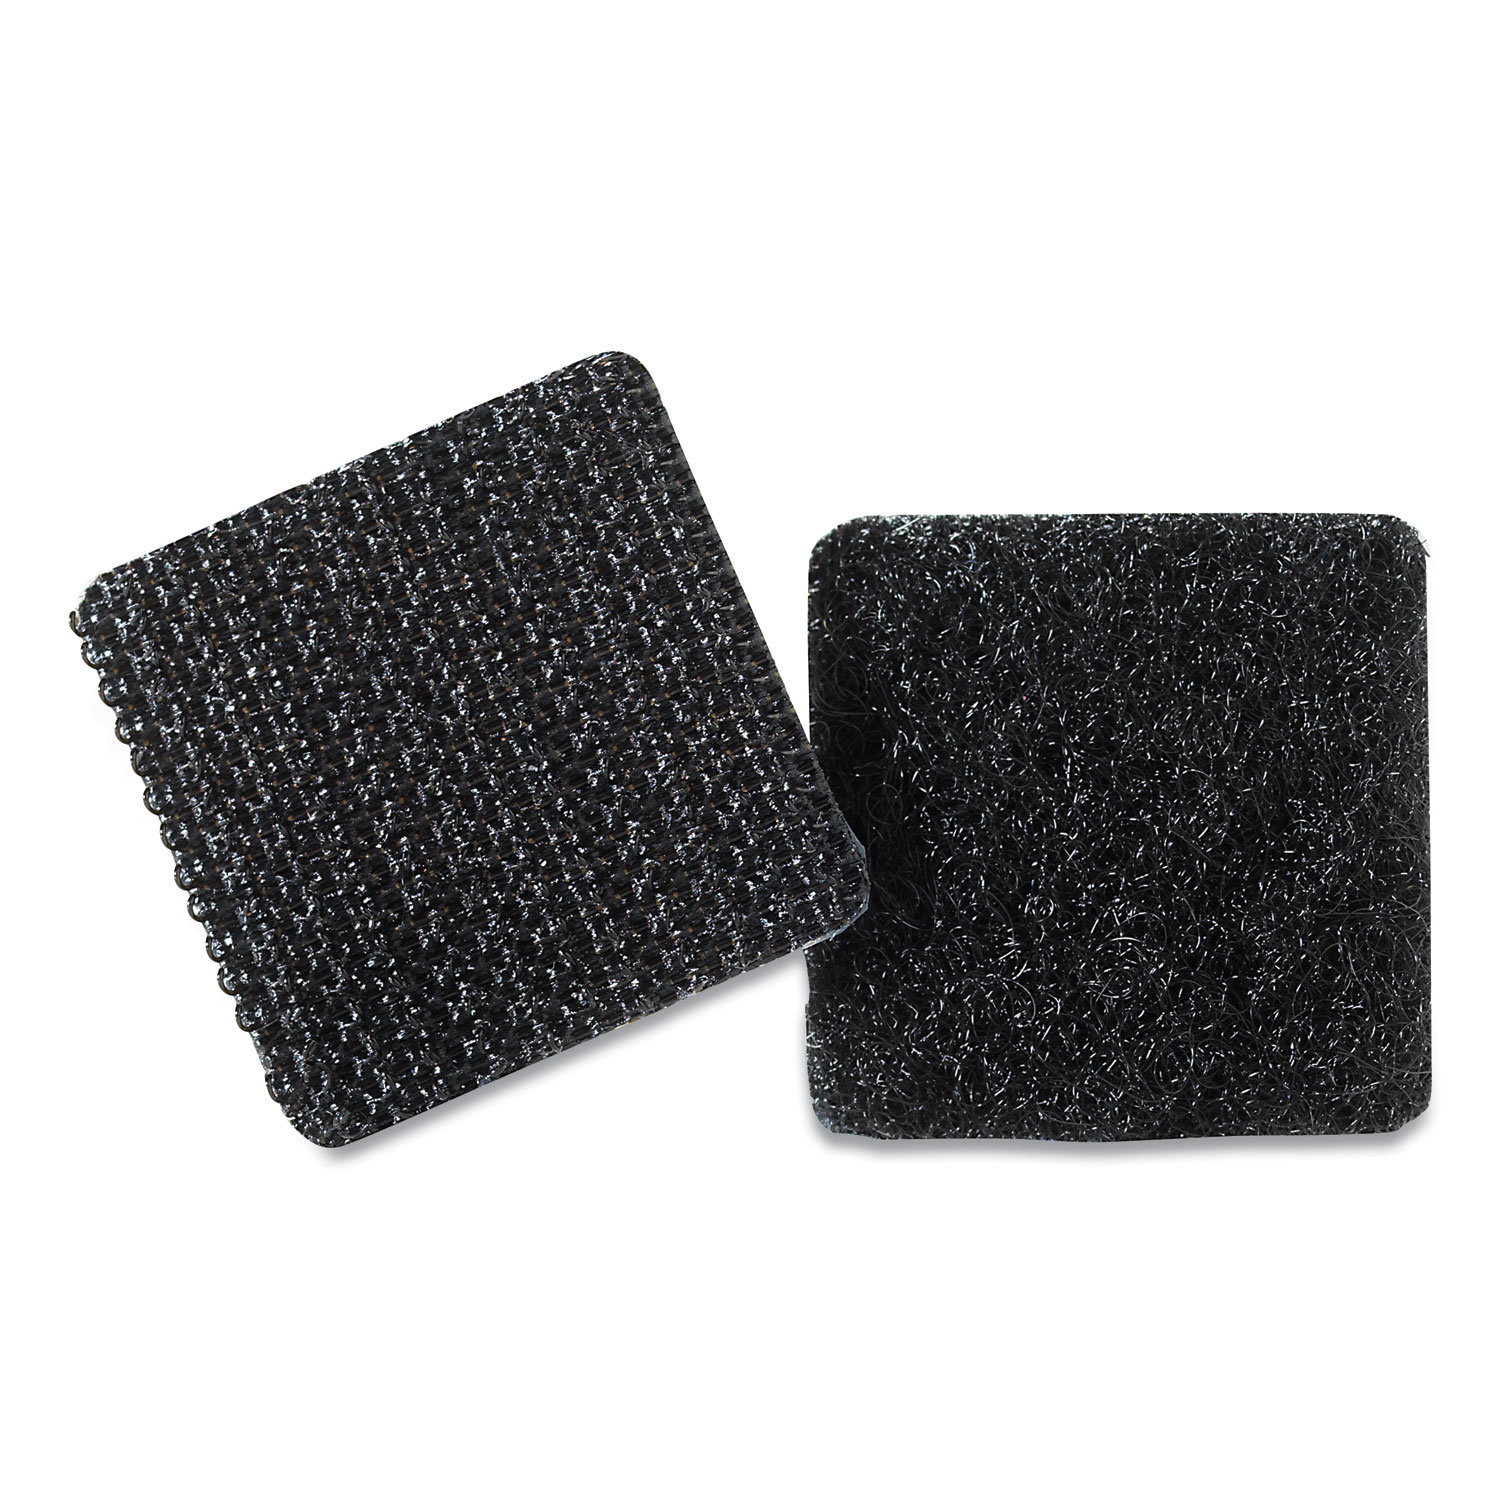 Velcro : Sticky-Back Hook & Loop Fastener Roll, 15, Clear -:- Sold as 2  Packs of - 1 - / - Total of 2 Each